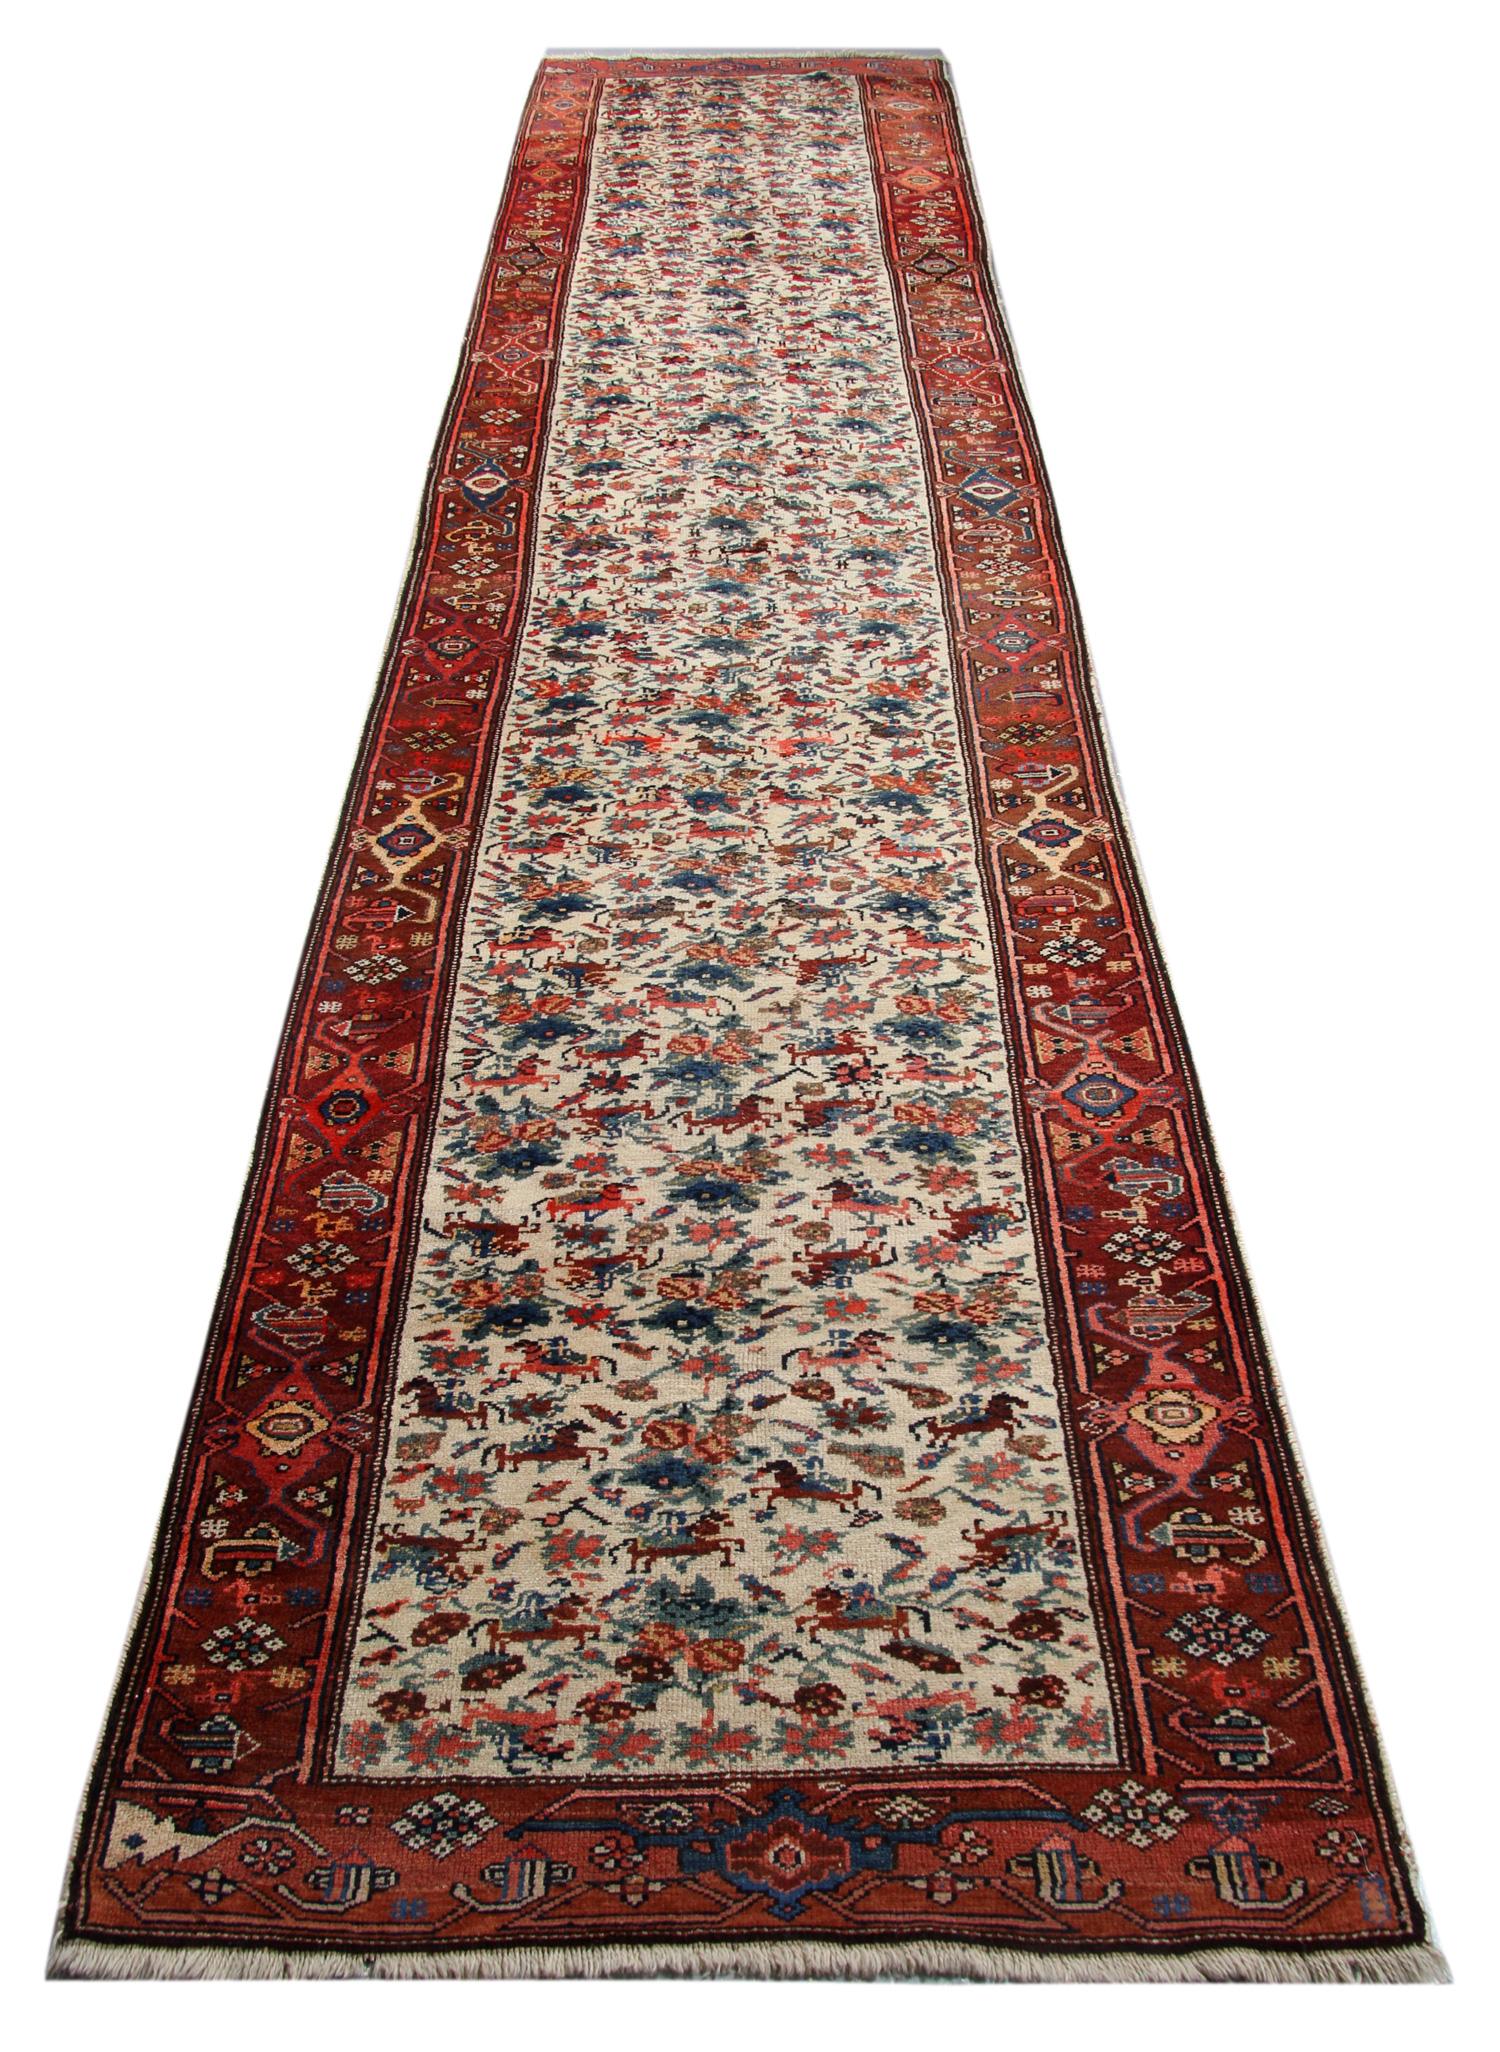 Antique Caucasian Karabagh rugs and runners, circa 1890. These oriental rugs runners were made in the south-eastern Caucasus close to the Kazak district and bordering the north-eastern. These antique Runner rugs are exemplary in their quality and